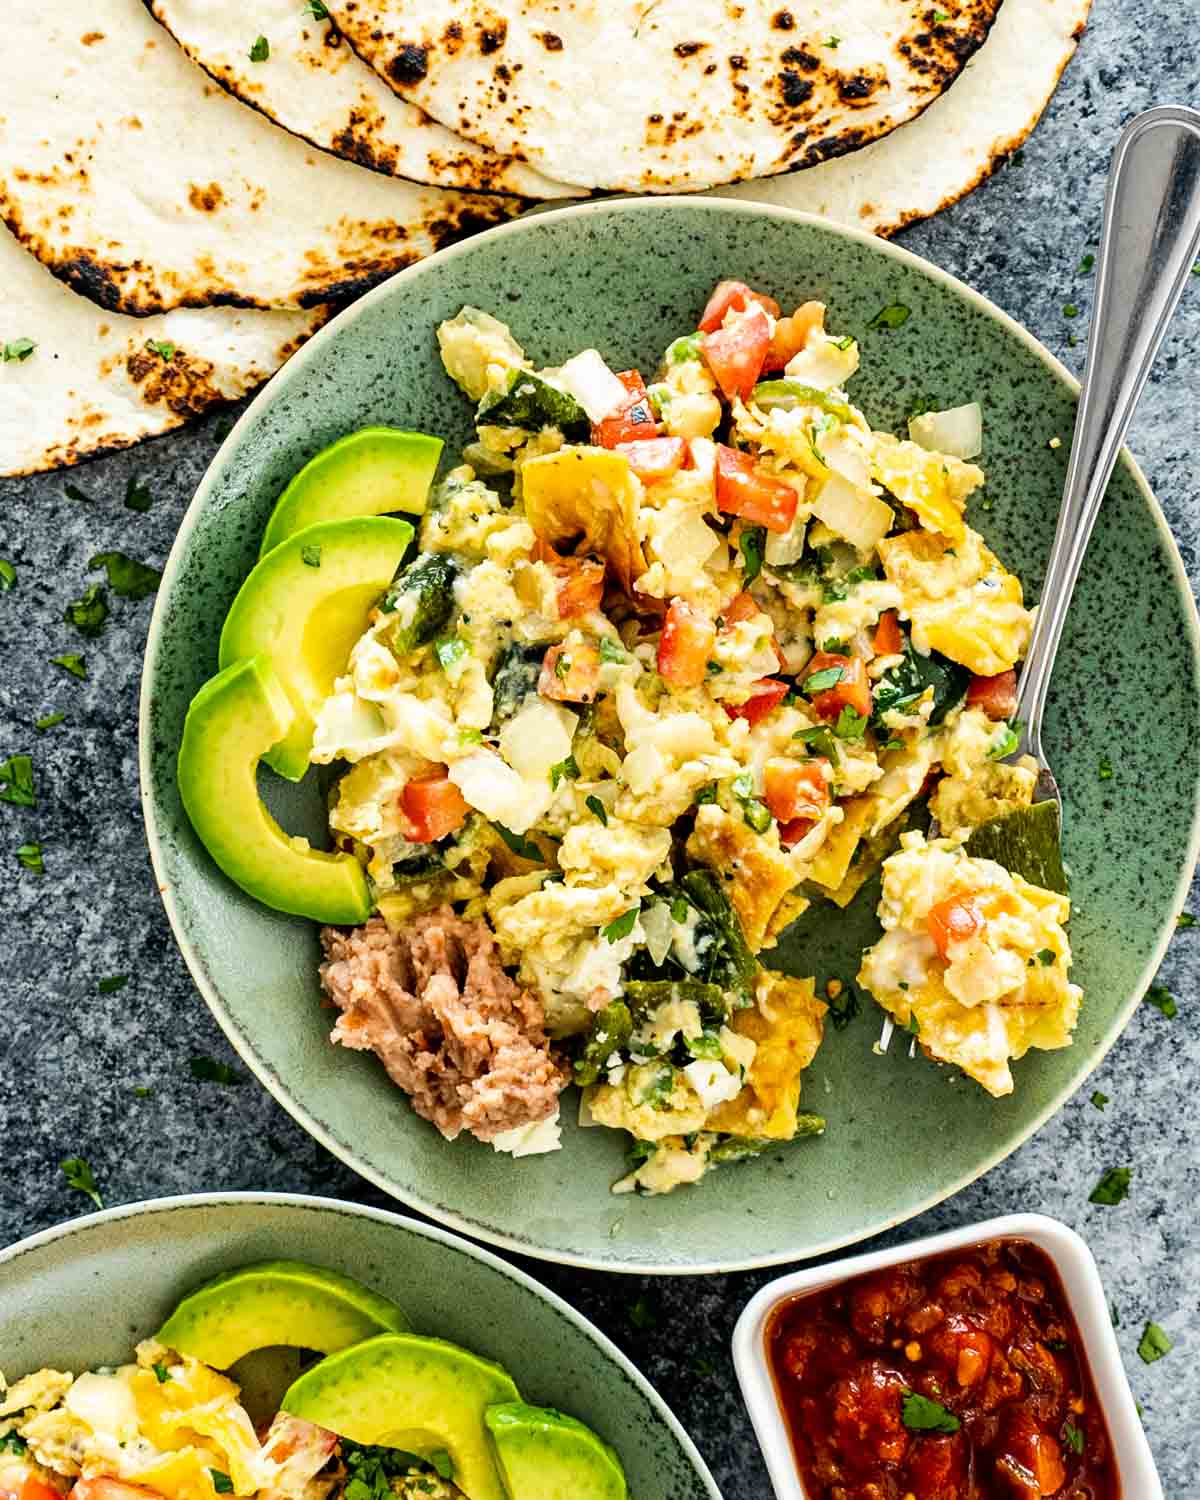 migas in a green plate with some toasted tortillas.